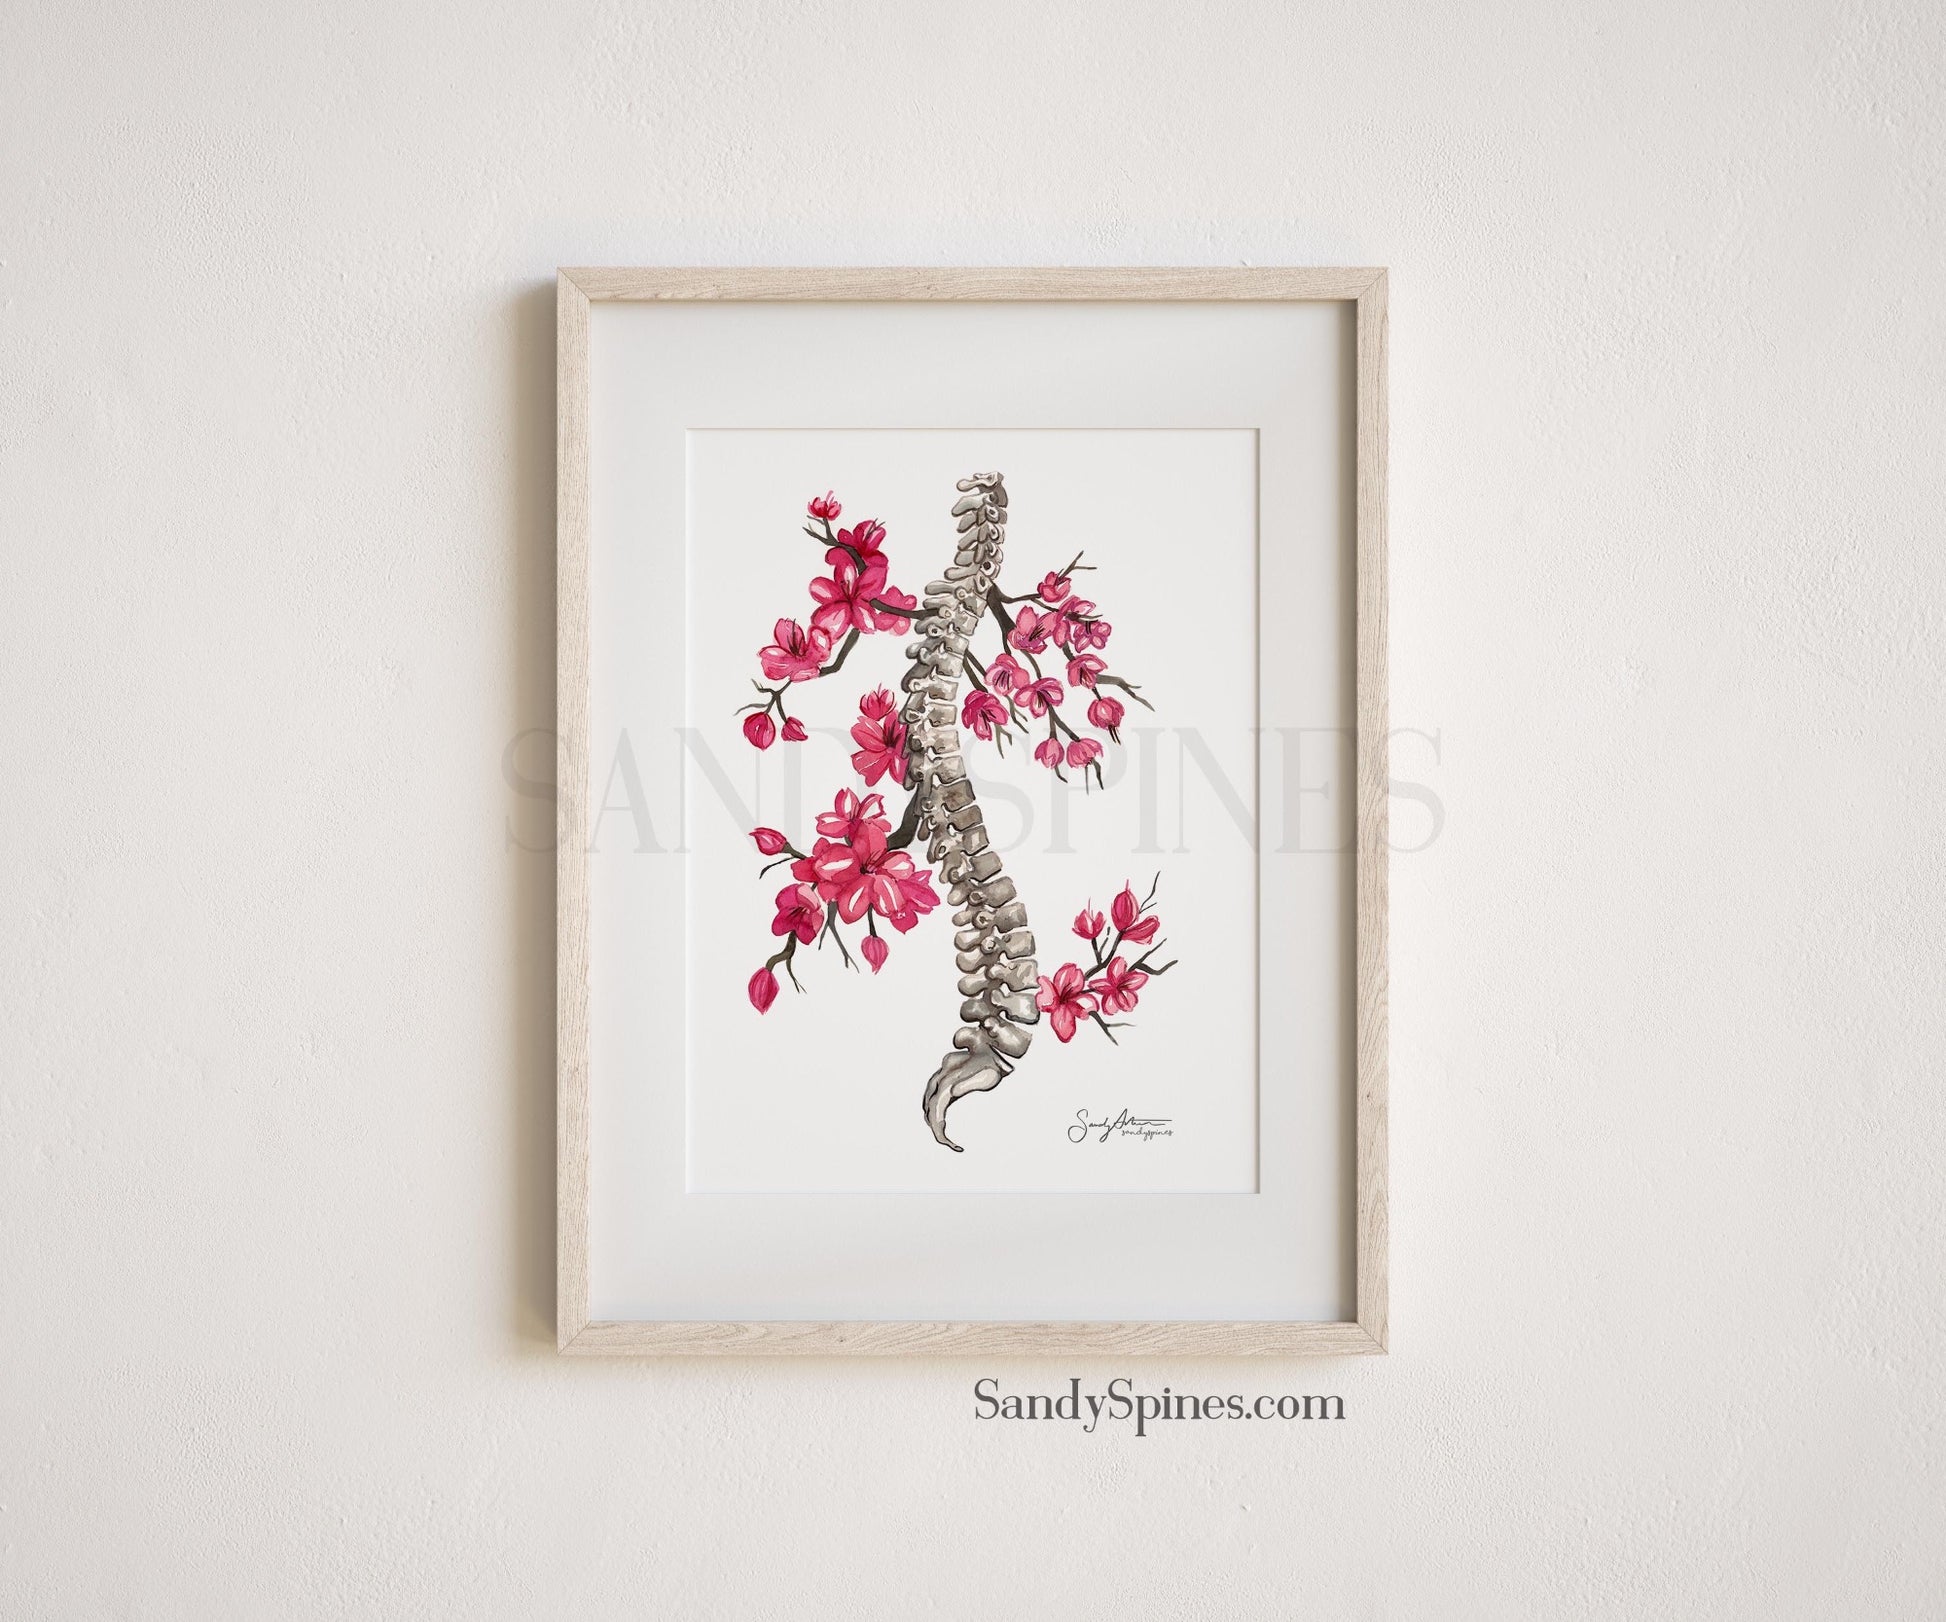 Original Artwork by Dr Sandy Arthur; Hand drawn spinal column with blossoms illustrated in watercolor attached